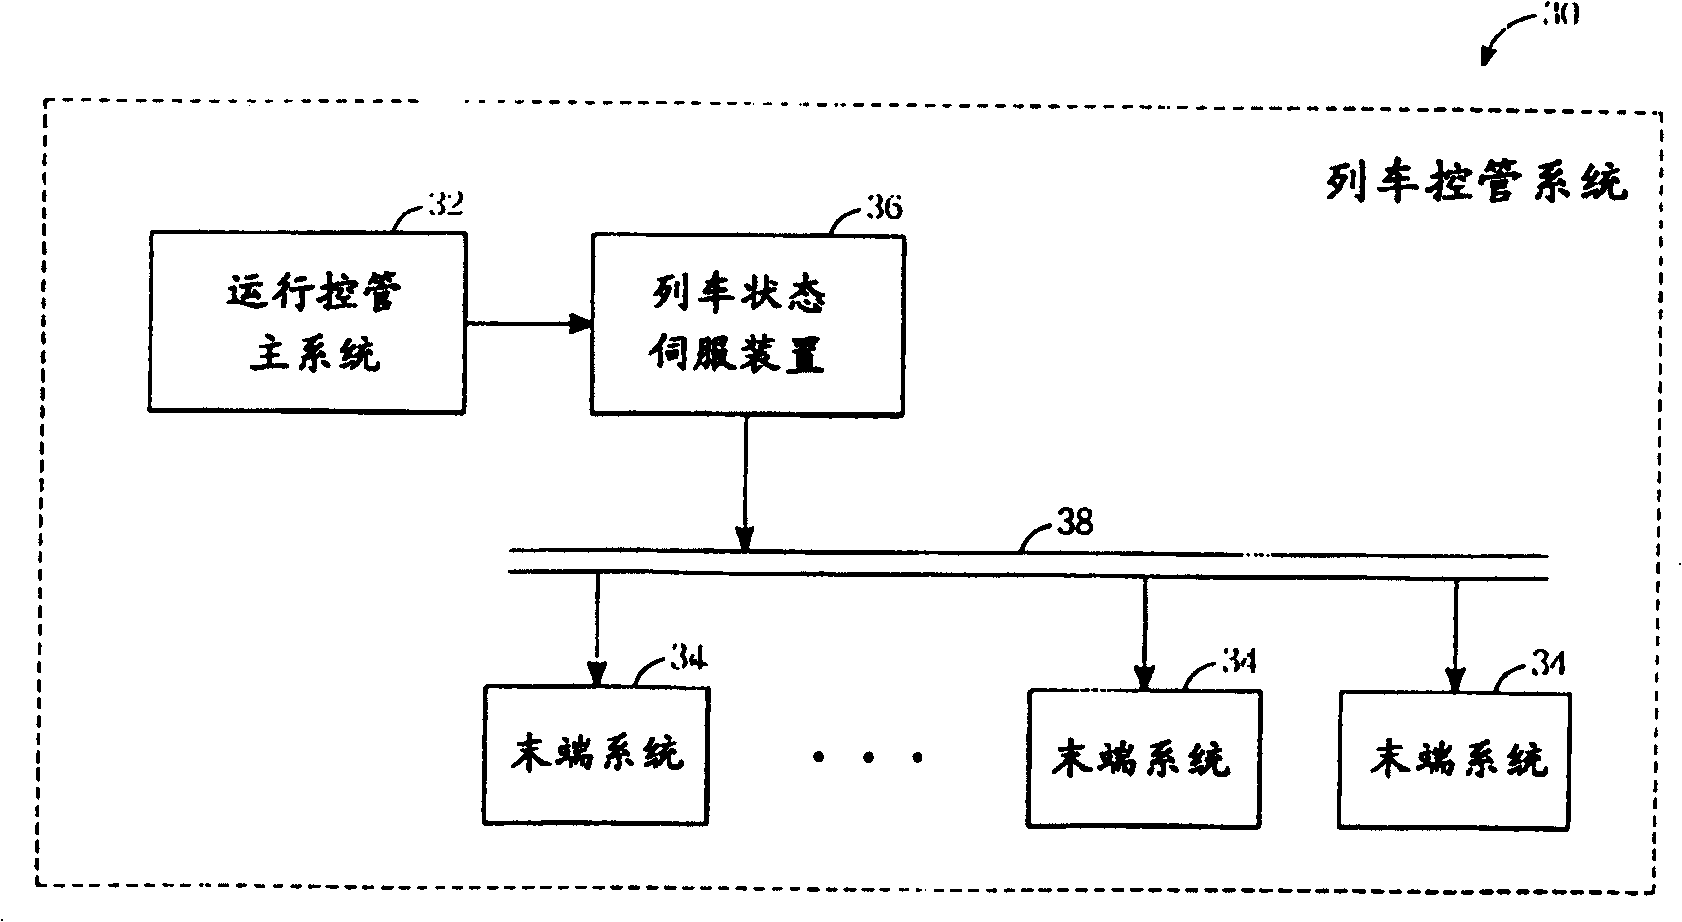 Train state servo device and method for displaying dynamic train information